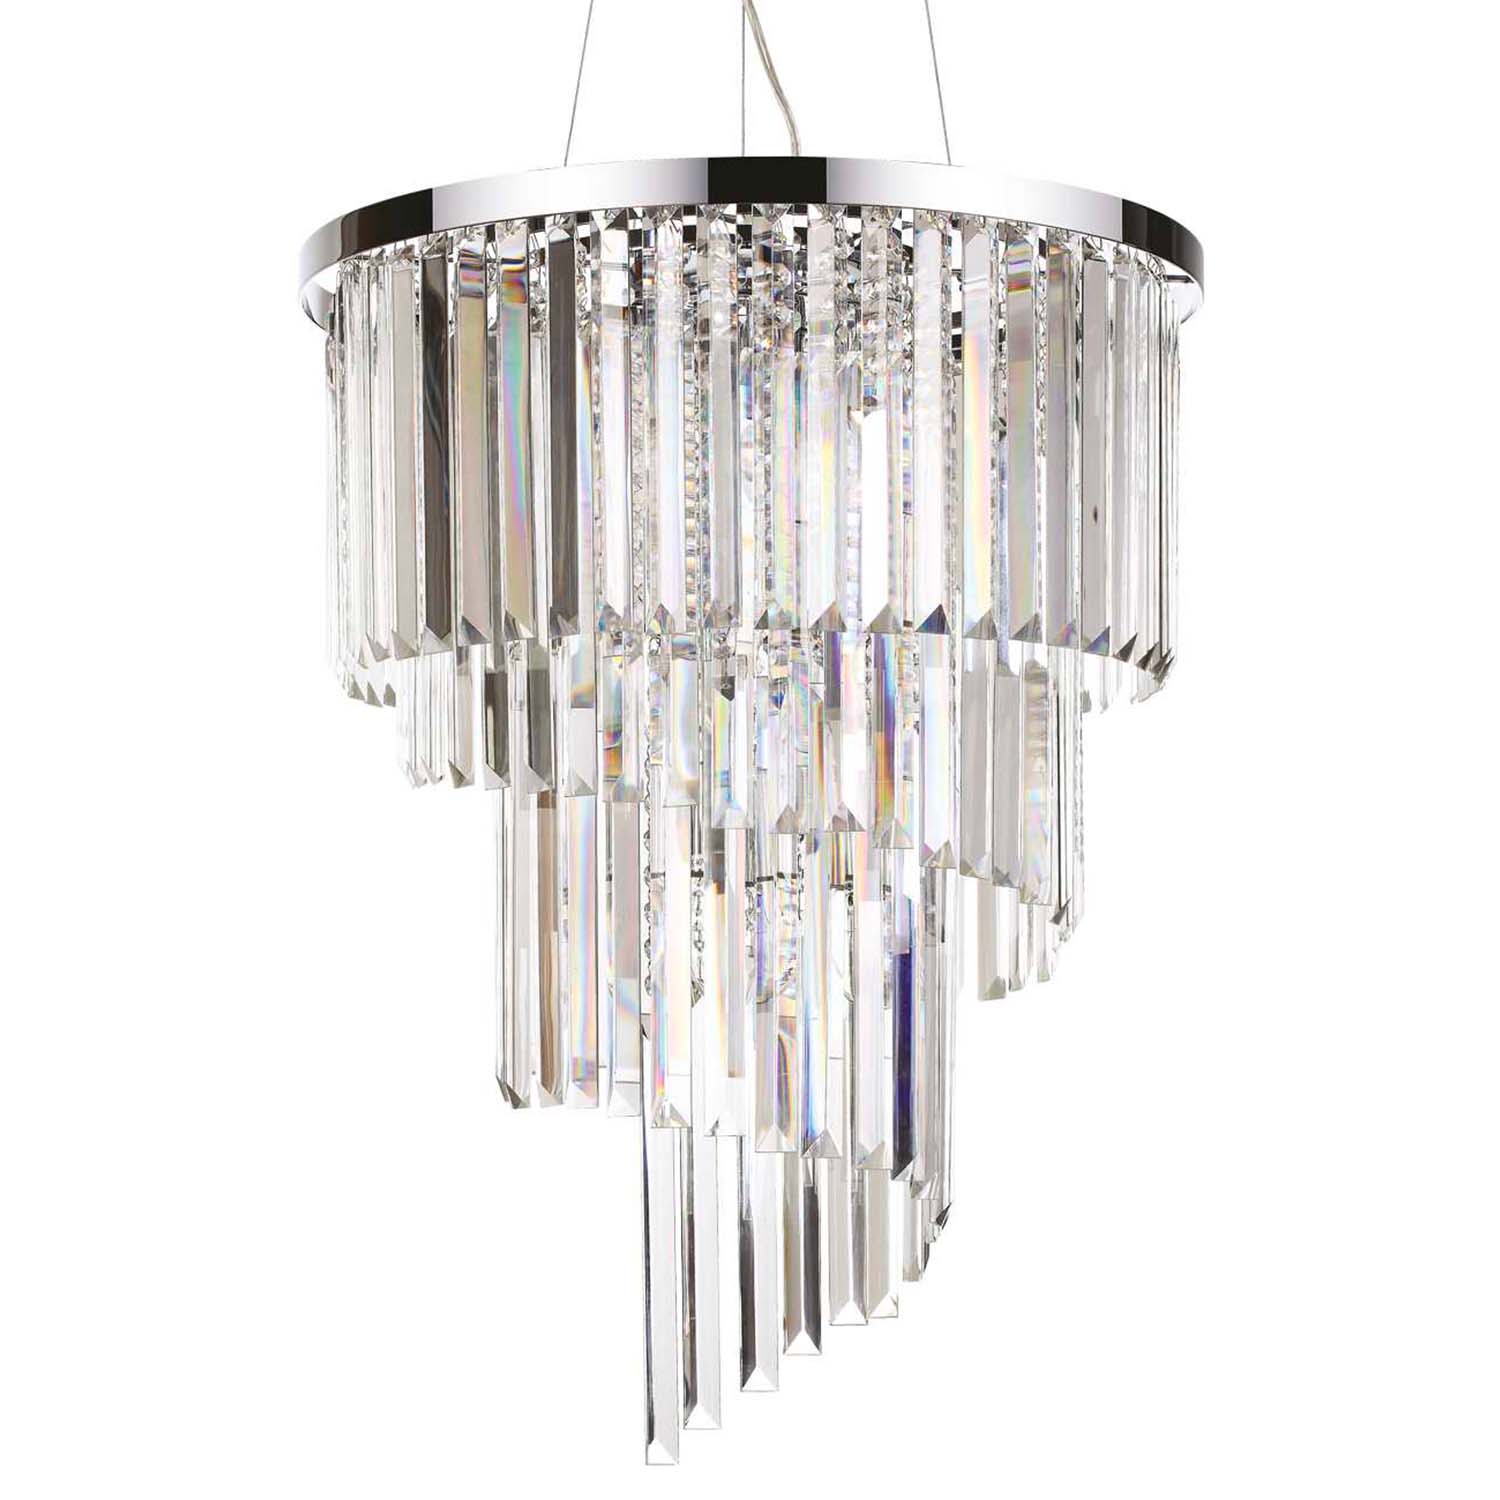 CARLTON - Chic spiral chandelier in silver or gold crystal